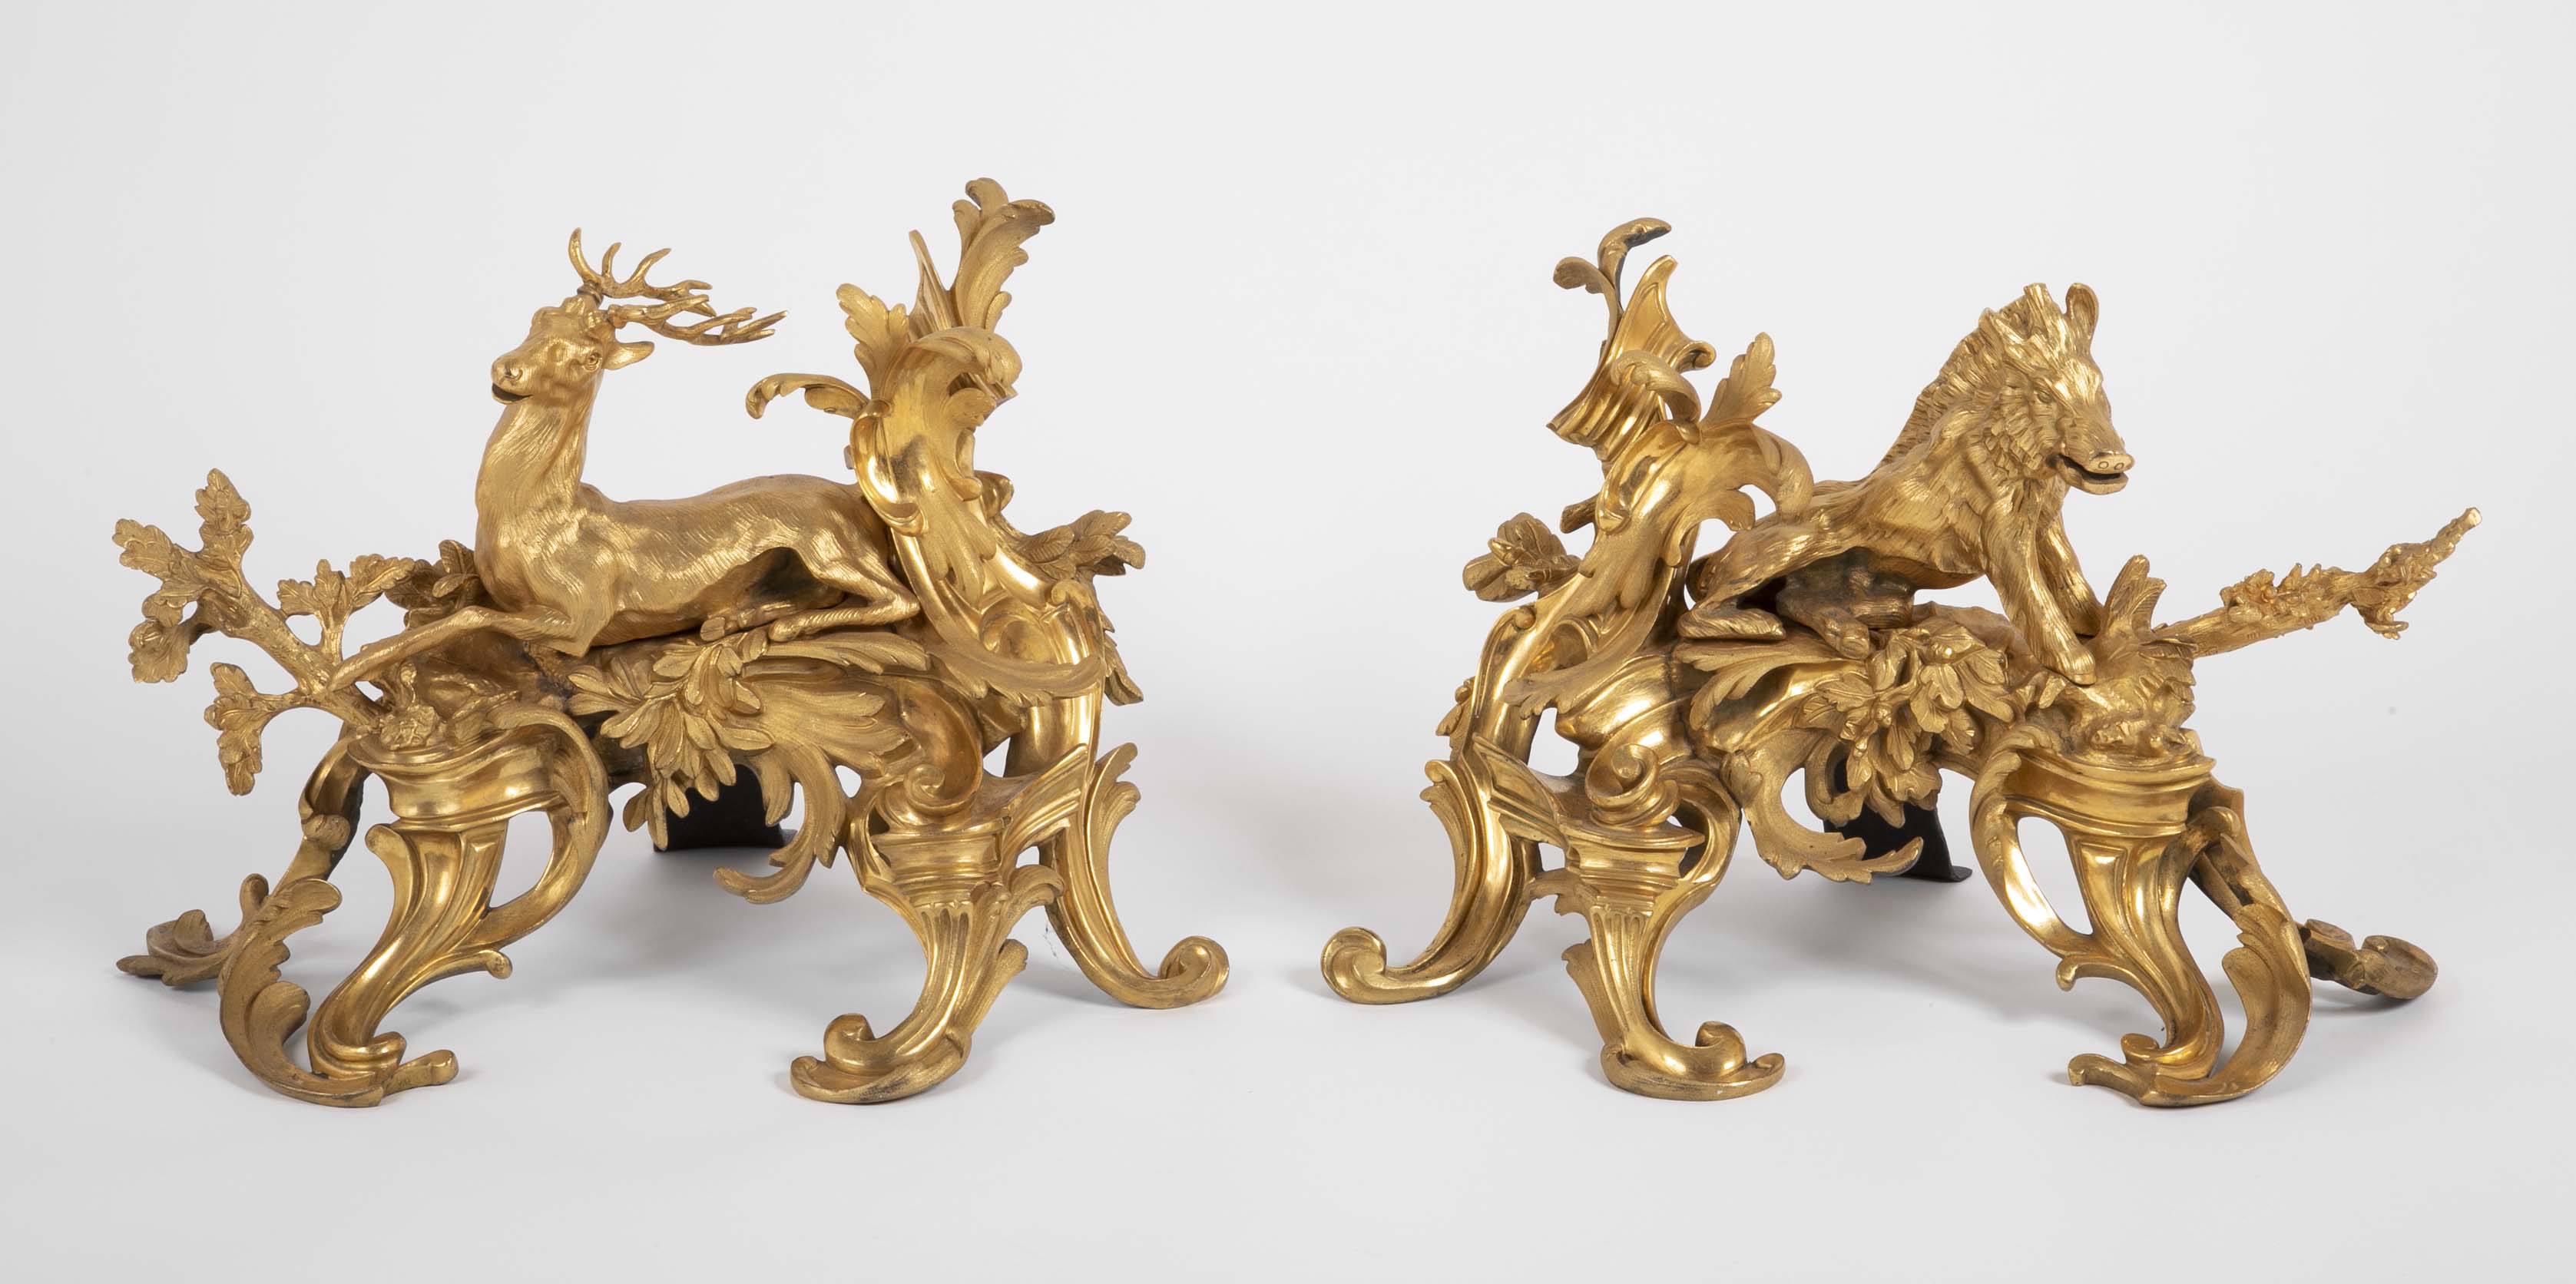 Fabulous Pair of 19th Century Louis XV Style D'ore Bronze Chenets